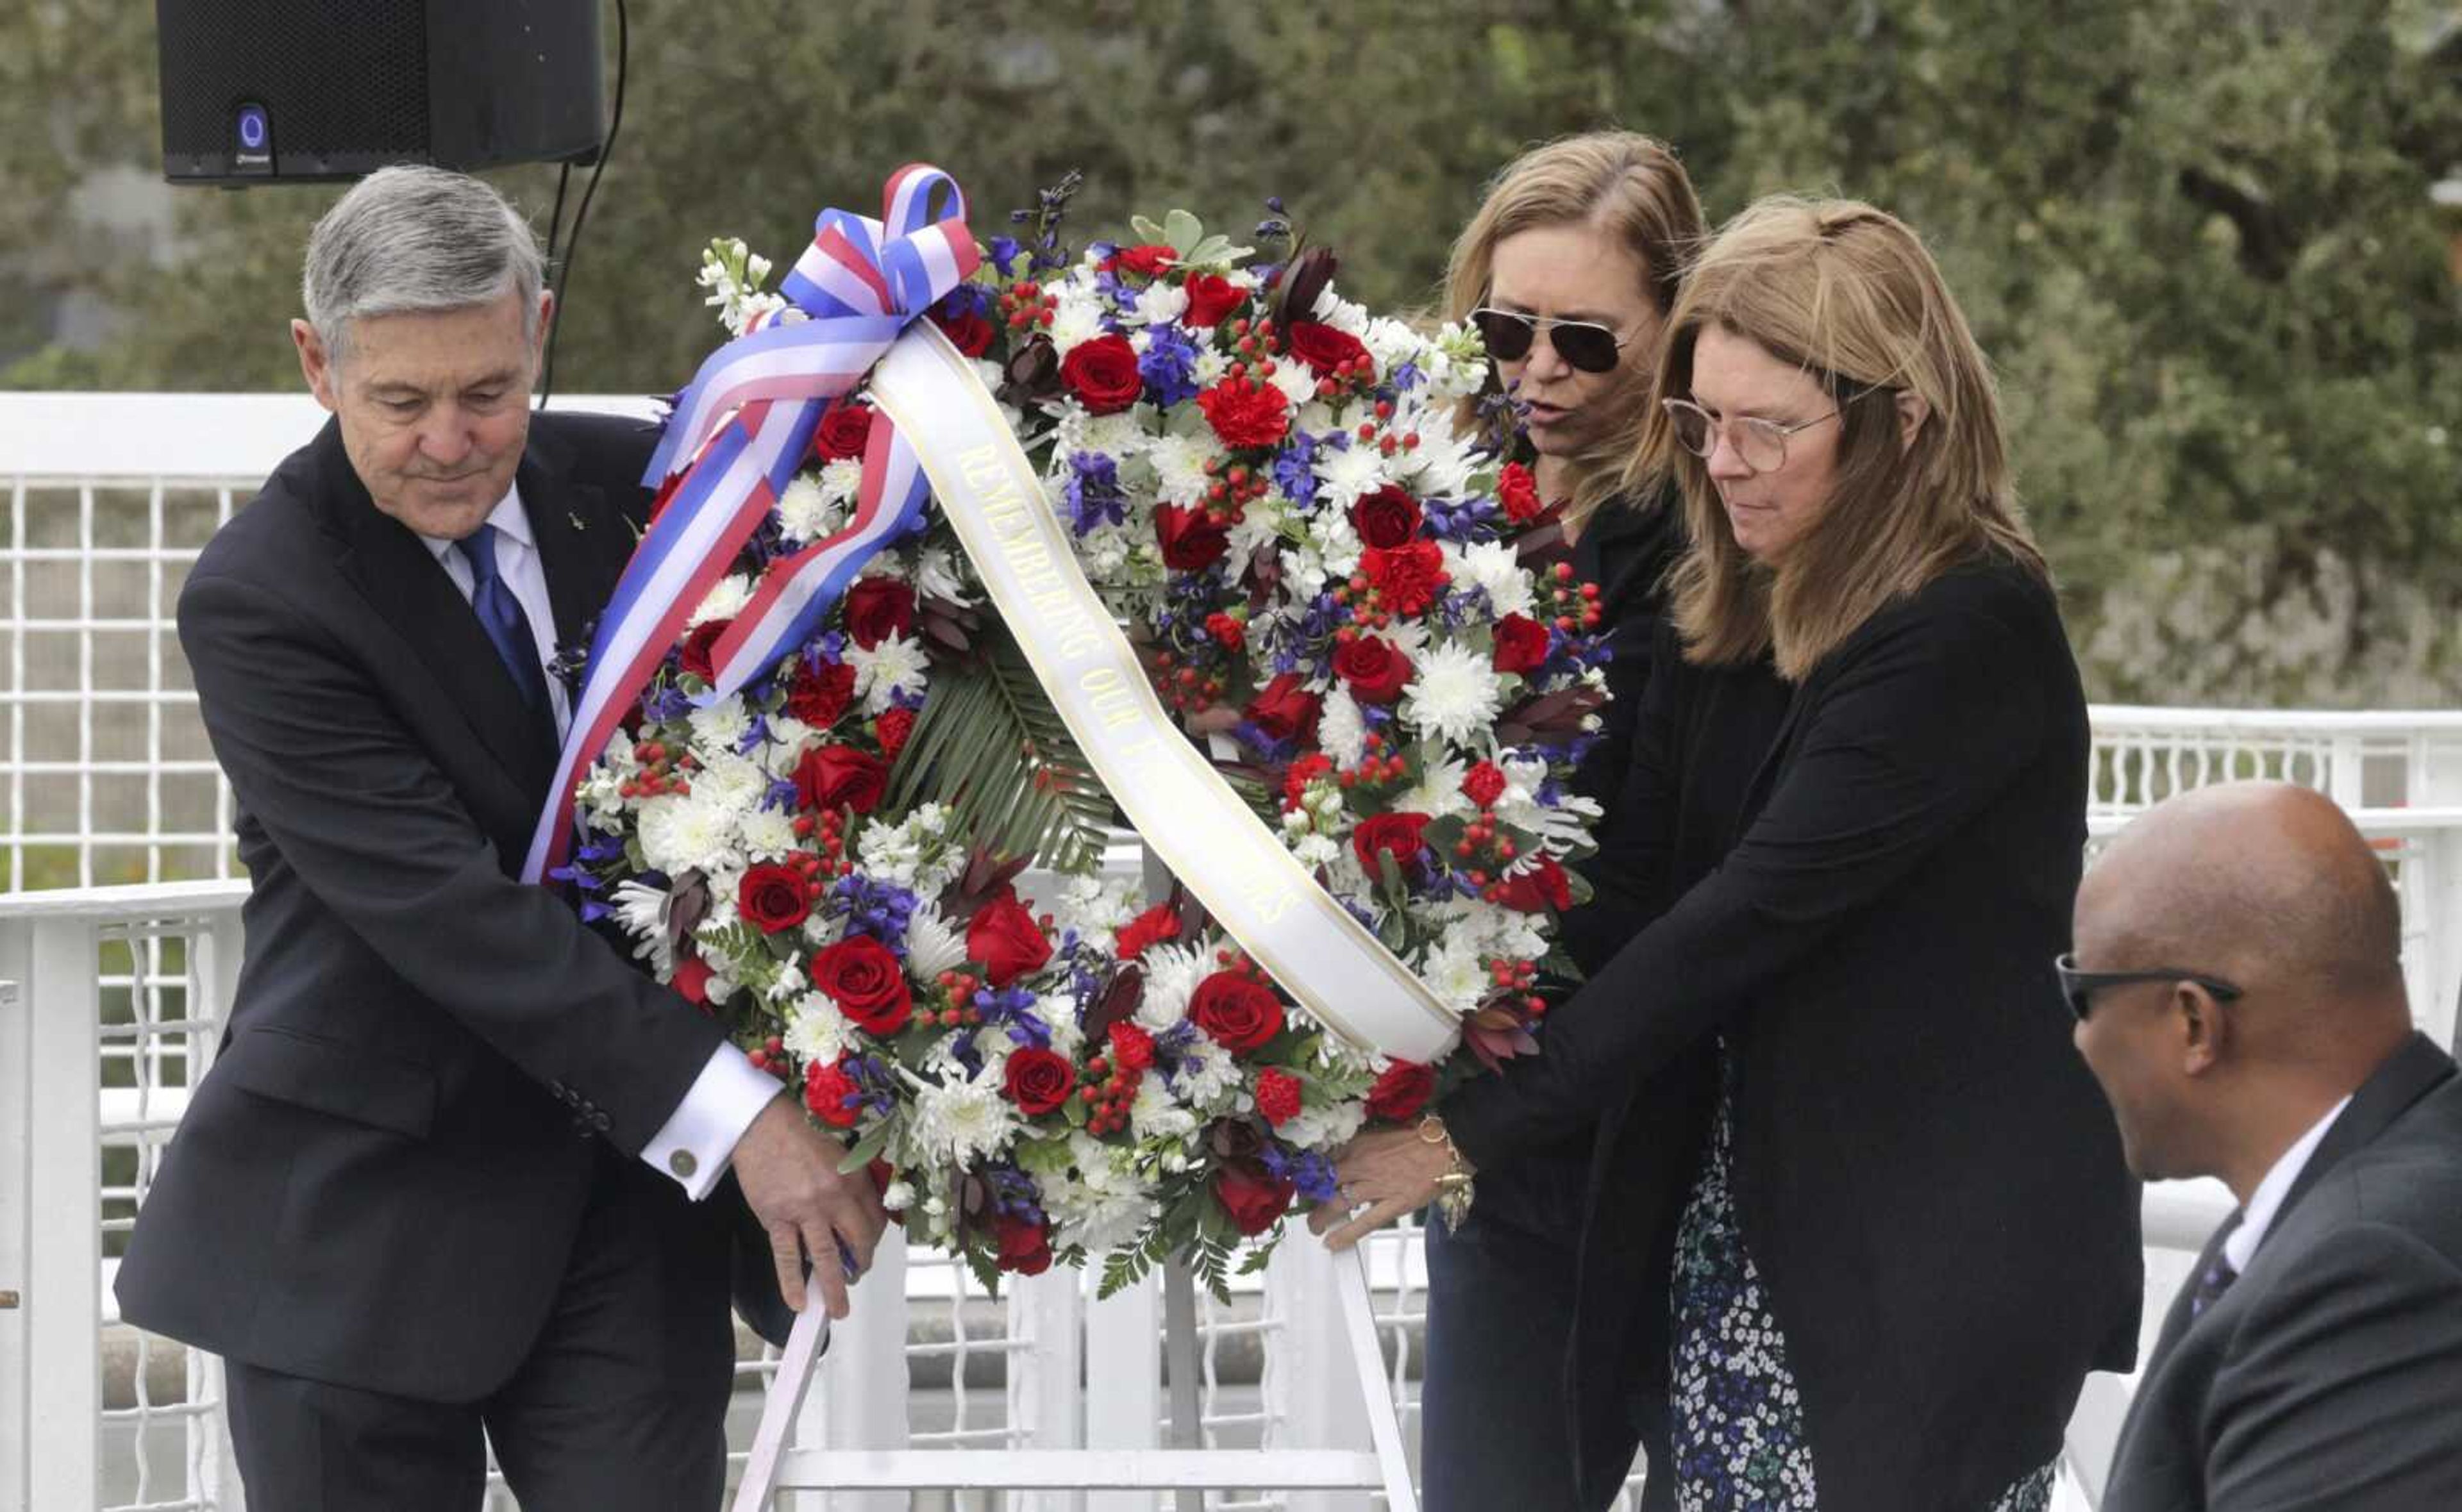 A wreath is presented Thursday during NASA's Day of Remembrance ceremony, hosted by the Astronauts Memorial Foundation at Kennedy Space Center Visitor Complex. NASA is marking the 20th anniversary of the space shuttle Columbia tragedy with somber ceremonies during its annual tribute to fallen astronauts.